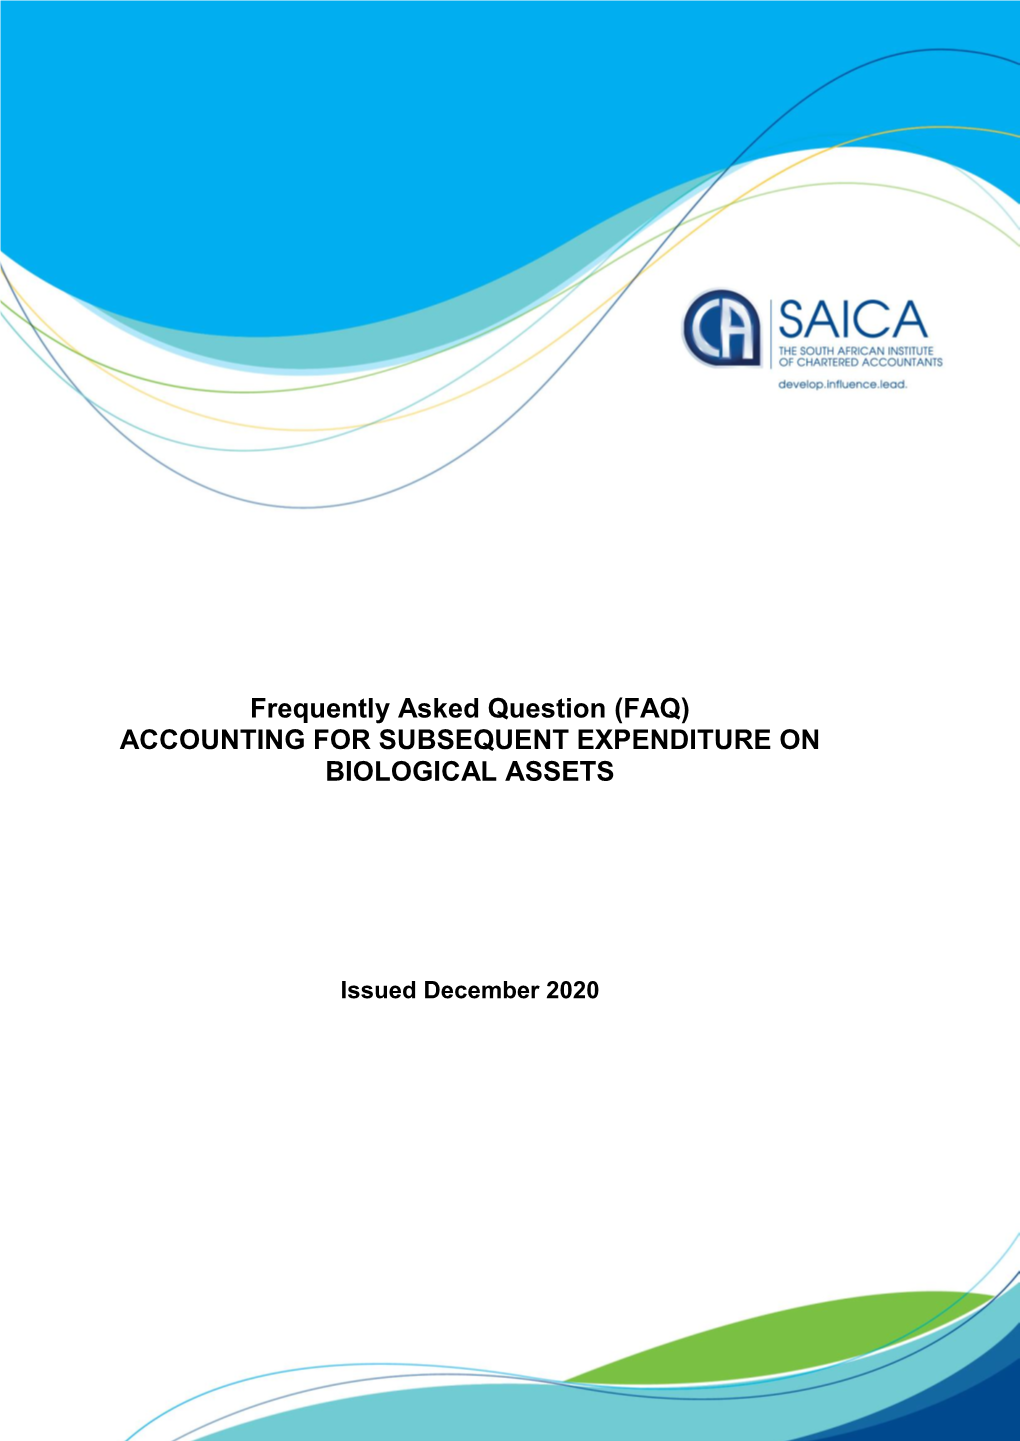 Accounting for Subsequent Expenditure on Biological Assets